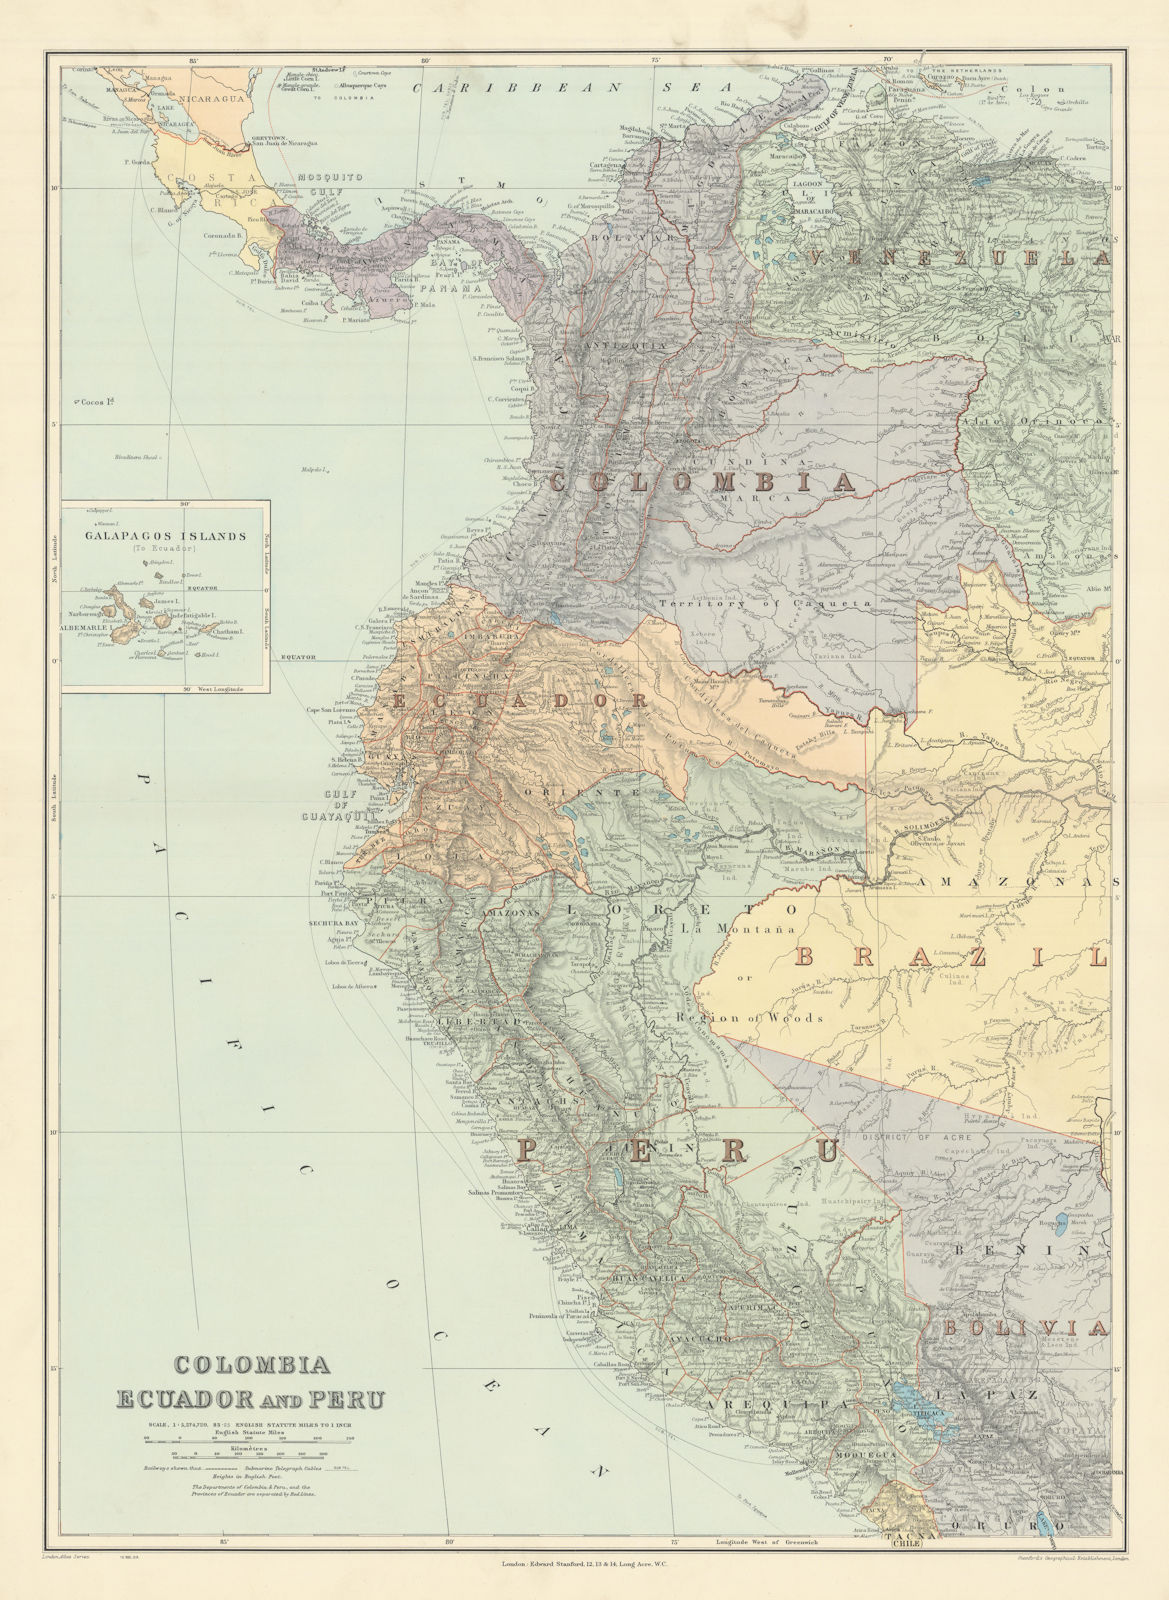 Colombia, Ecuador & Peru. Andean States. Panama canal. 71x52cm STANFORD 1904 map